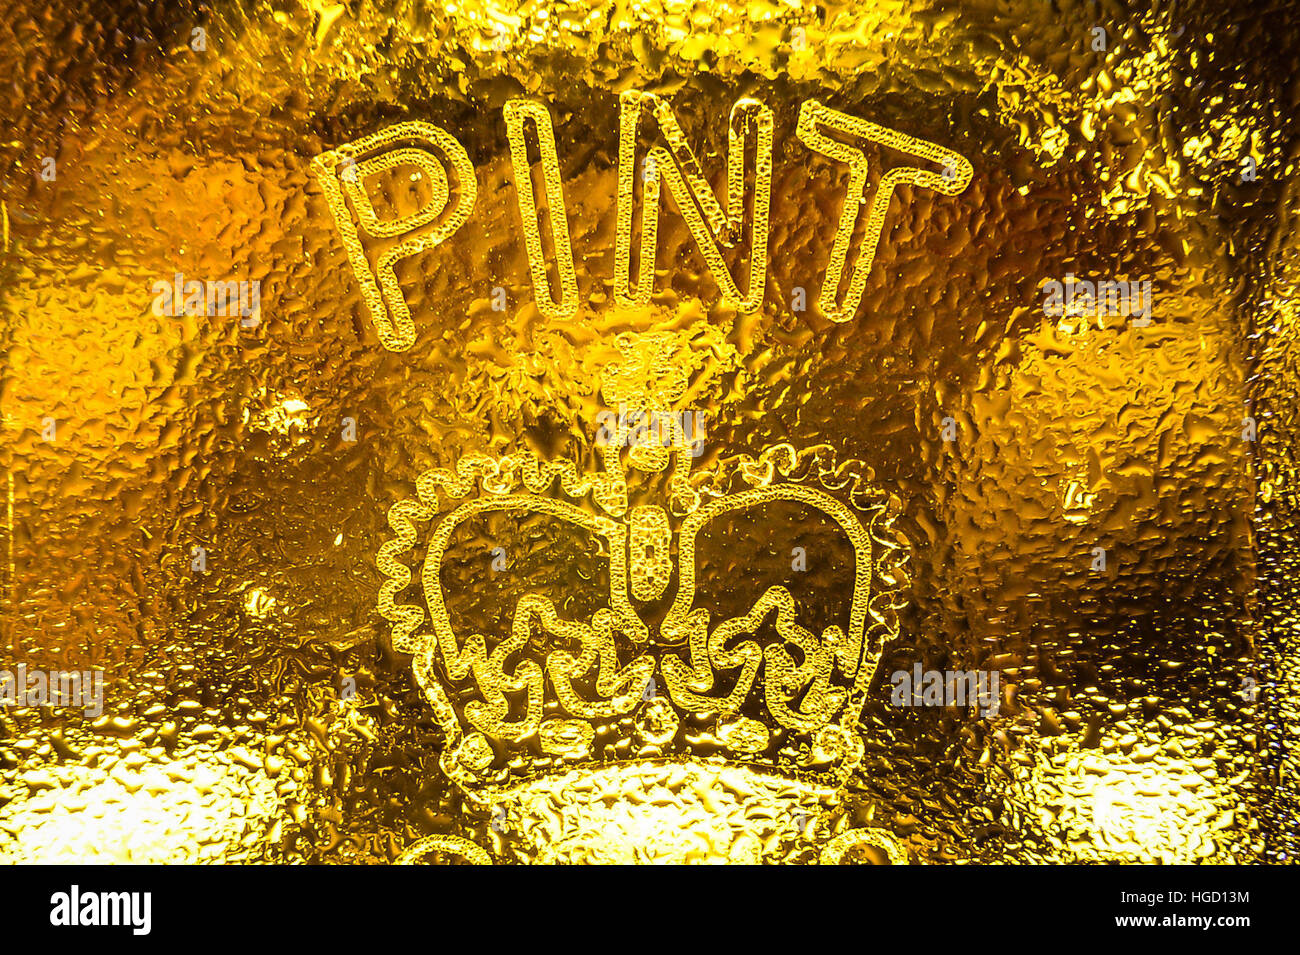 A dimpled pint glass etched with the Crown stamp rather than the European CE marking, as Ukip MEP Bill Etheridge has backed calls for the return of traditional Crown stamps on Britains pint glasses - a decade after they began to disappear in favour of an EU-wide &Ograve;European Conformity&Oacute; mark. Stock Photo